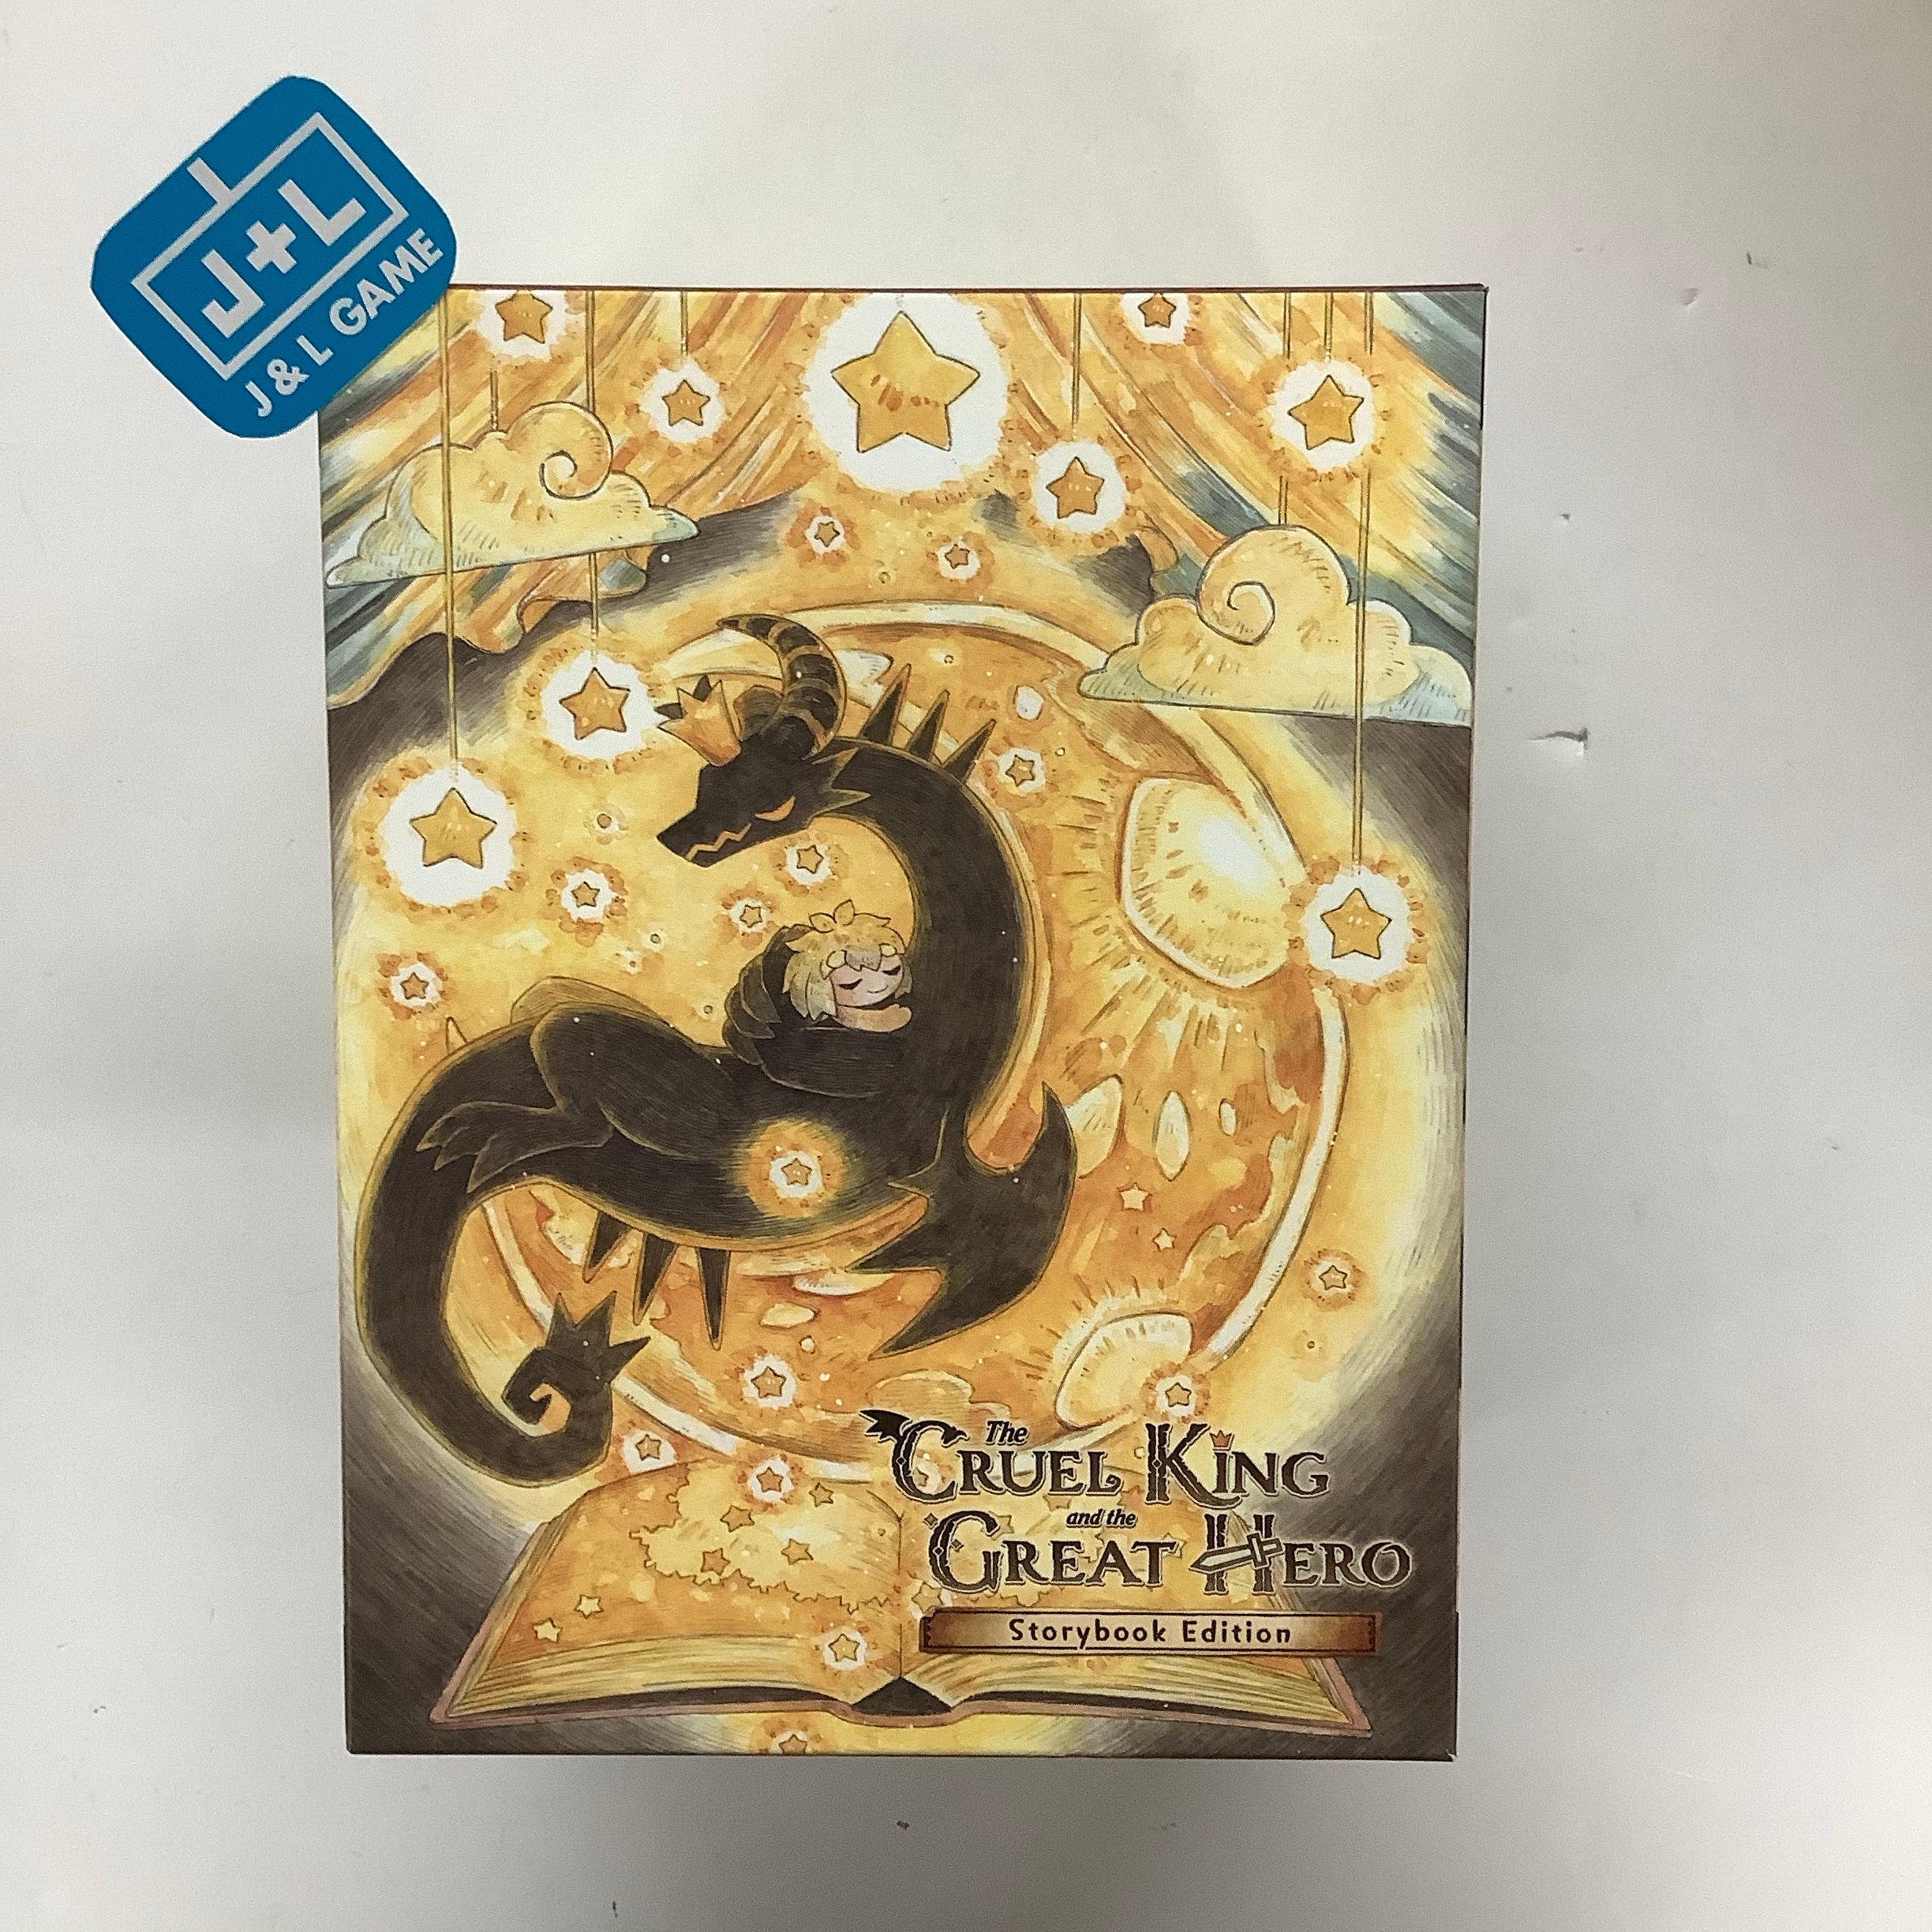 The Cruel King and the Great Hero: Storybook Edition - (NSW) Nintendo Switch [UNBOXING] Video Games NIS America   